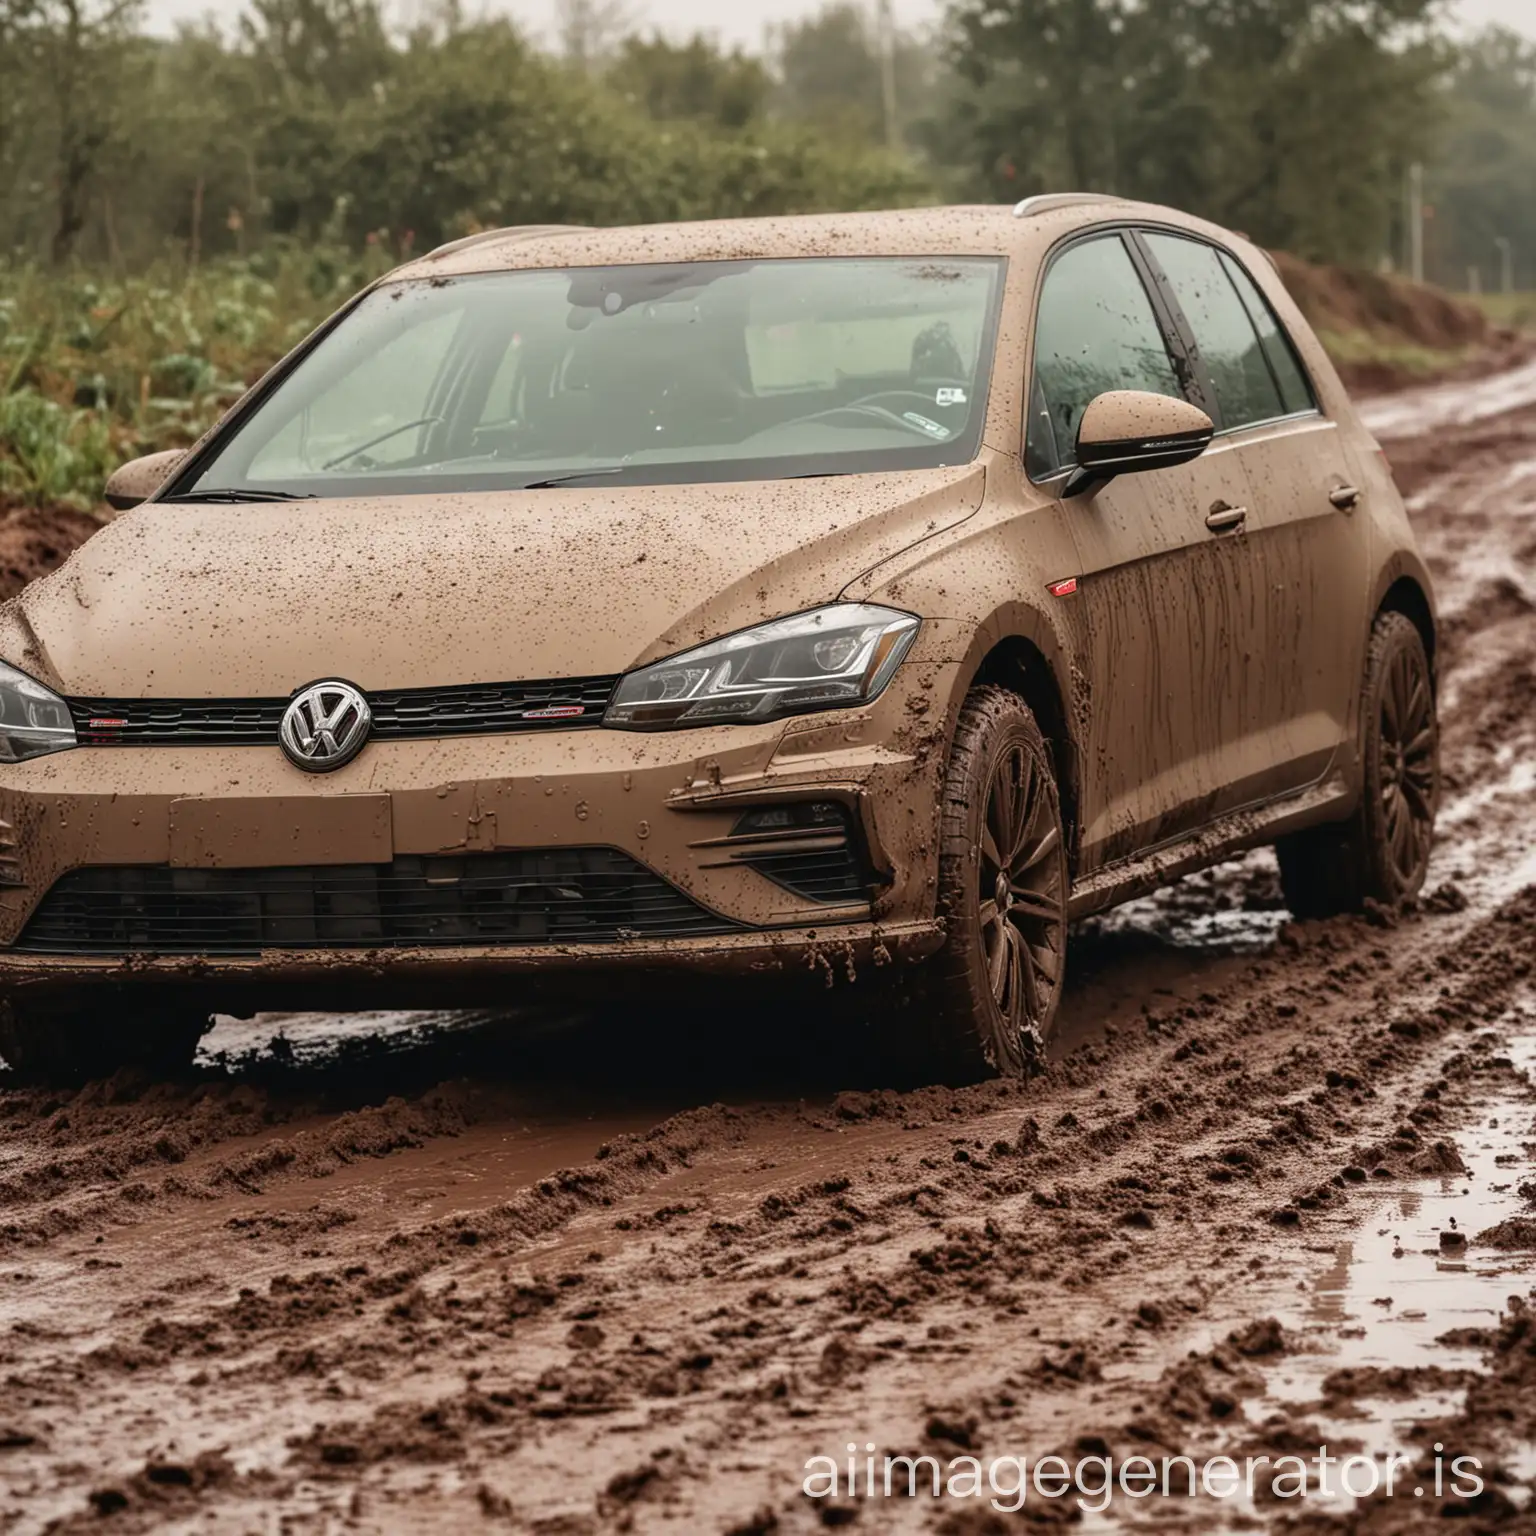 A new Volkswagen Golf MK8 in pastel colour is stuck on an extremely muddy road. The front tyres are covered in mud, the car is covered in thick mud, and a female driver is in the driver's seat.